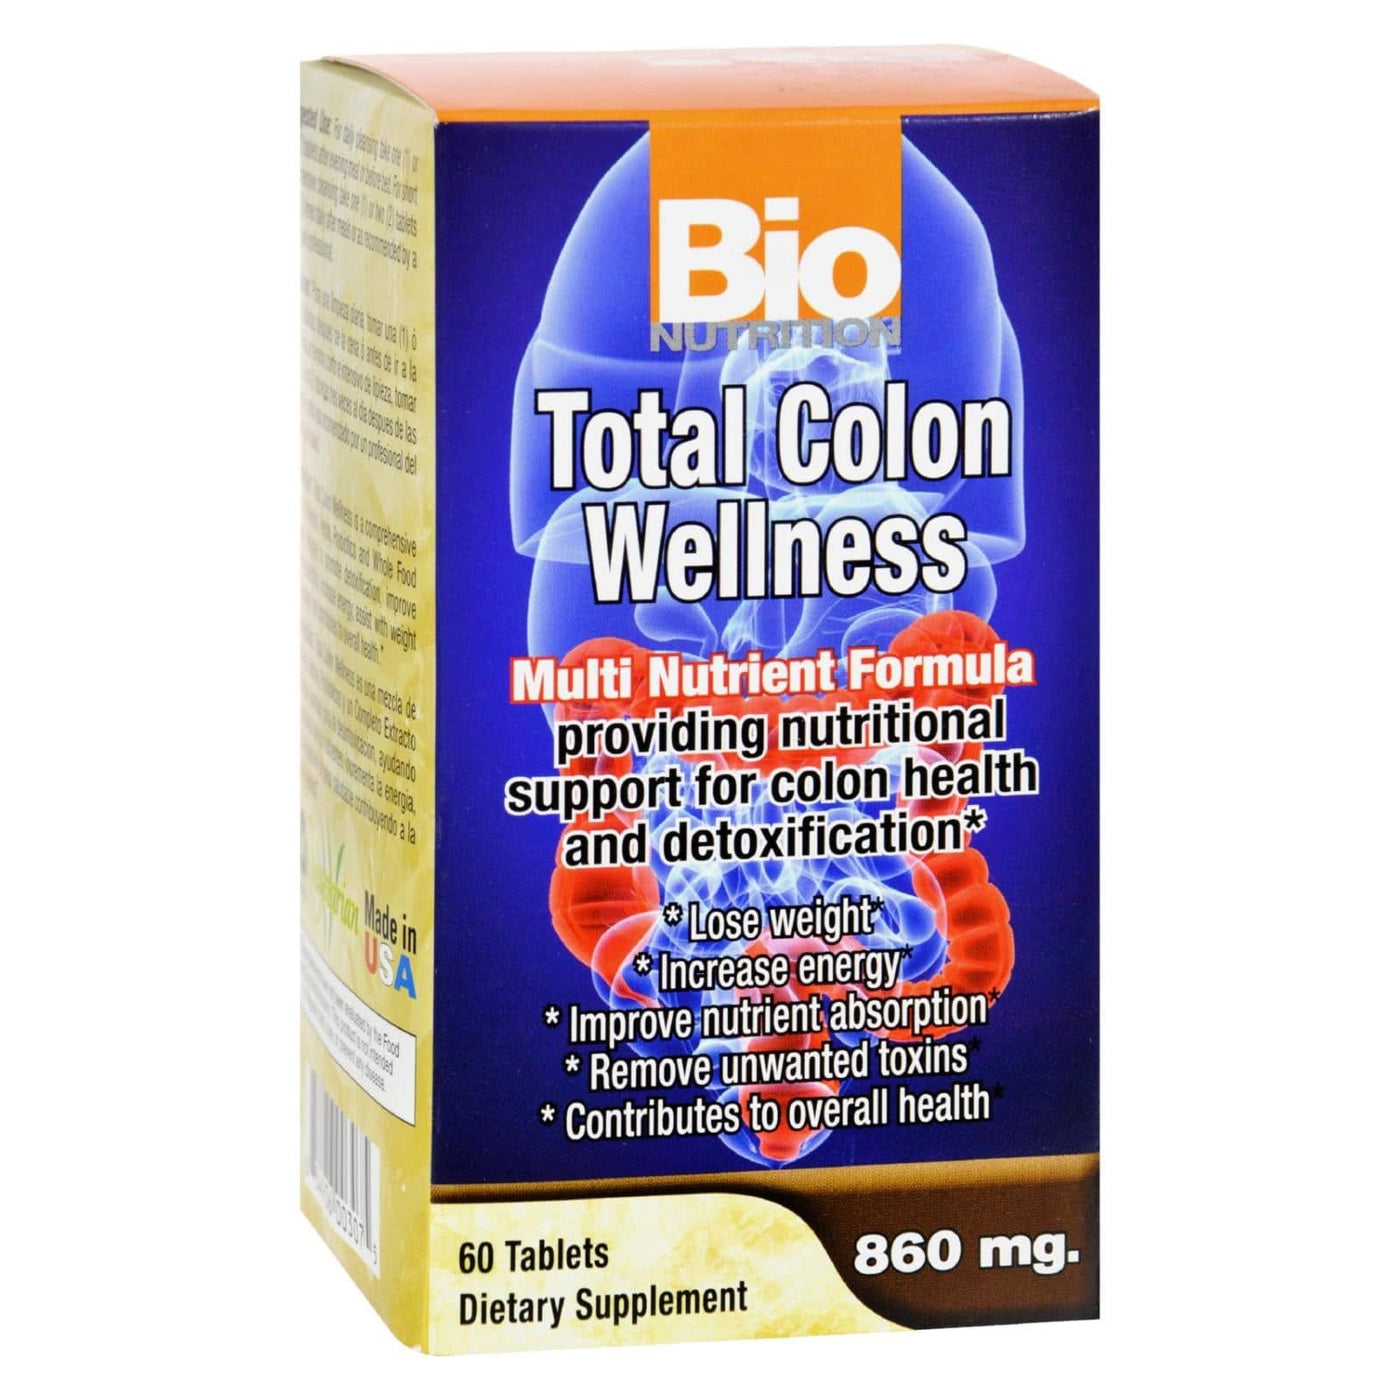 Bio Nutrition - Total Colon Wellness - 60 Tablets | OnlyNaturals.us